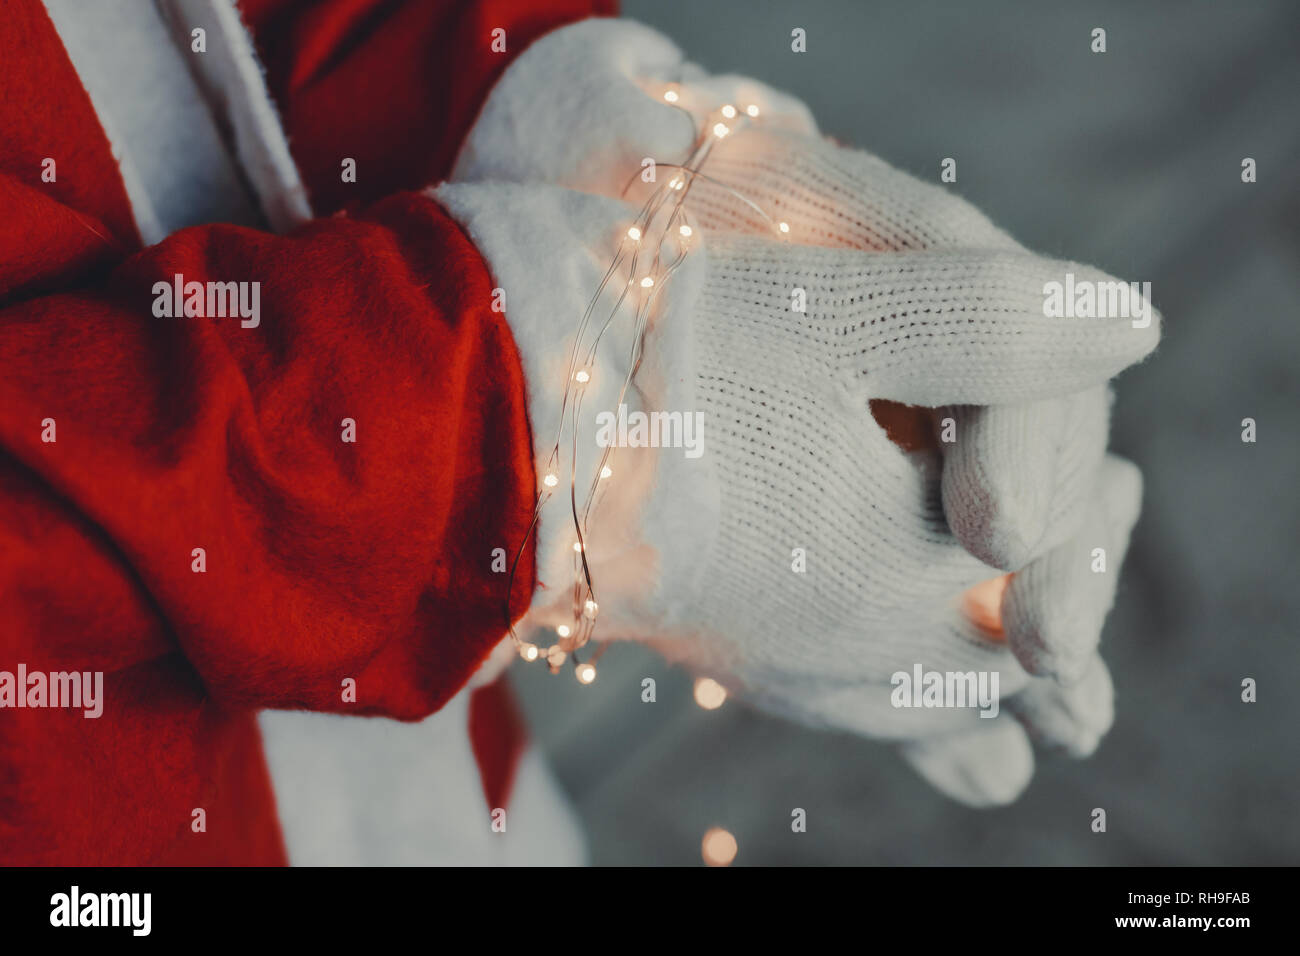 hands of santa claus chained with illuminated led lights Stock Photo